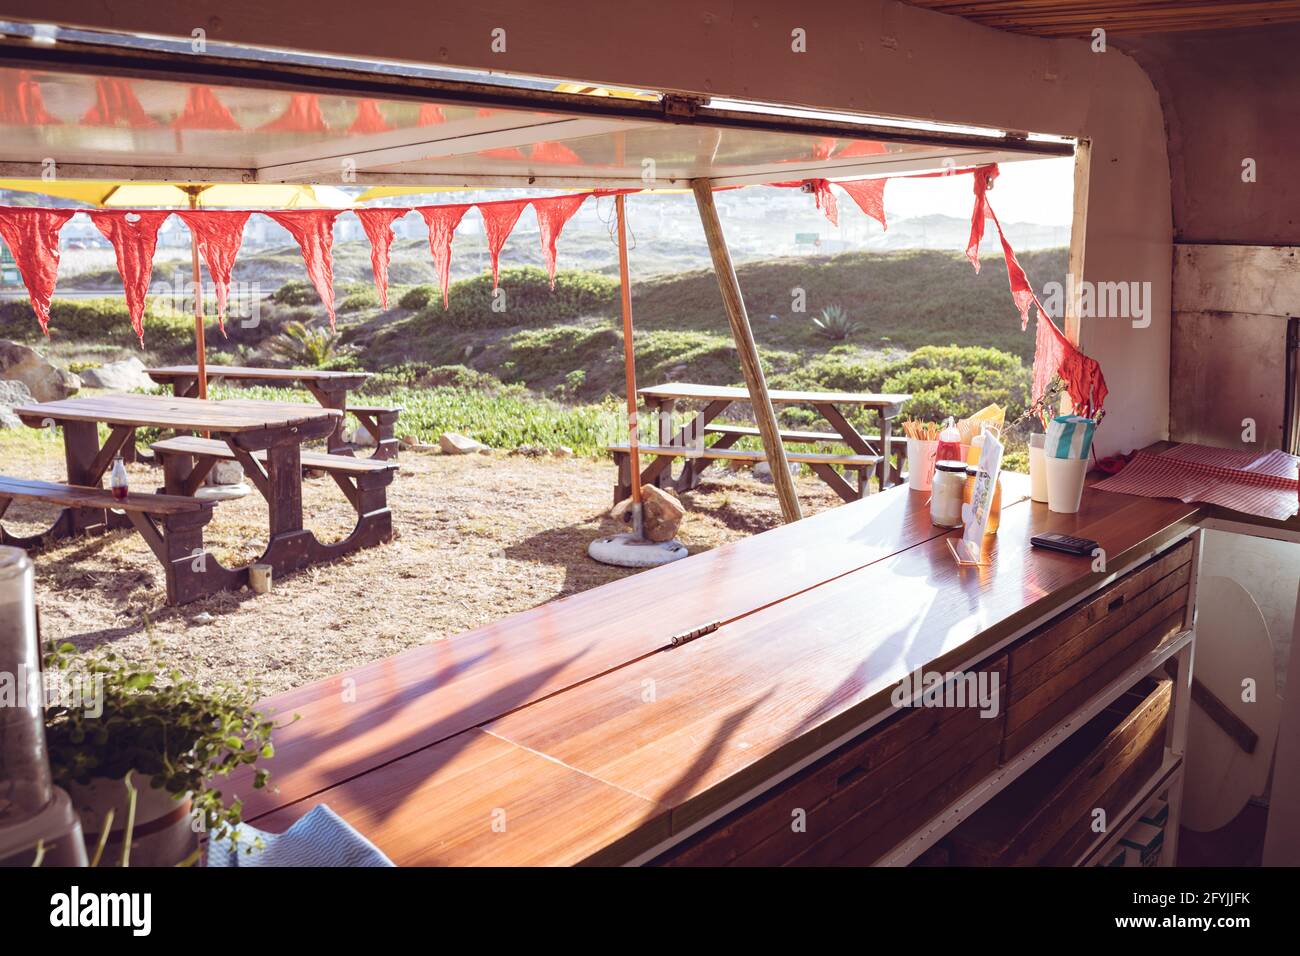 General view of food truck with red bunting and outside seating Stock Photo